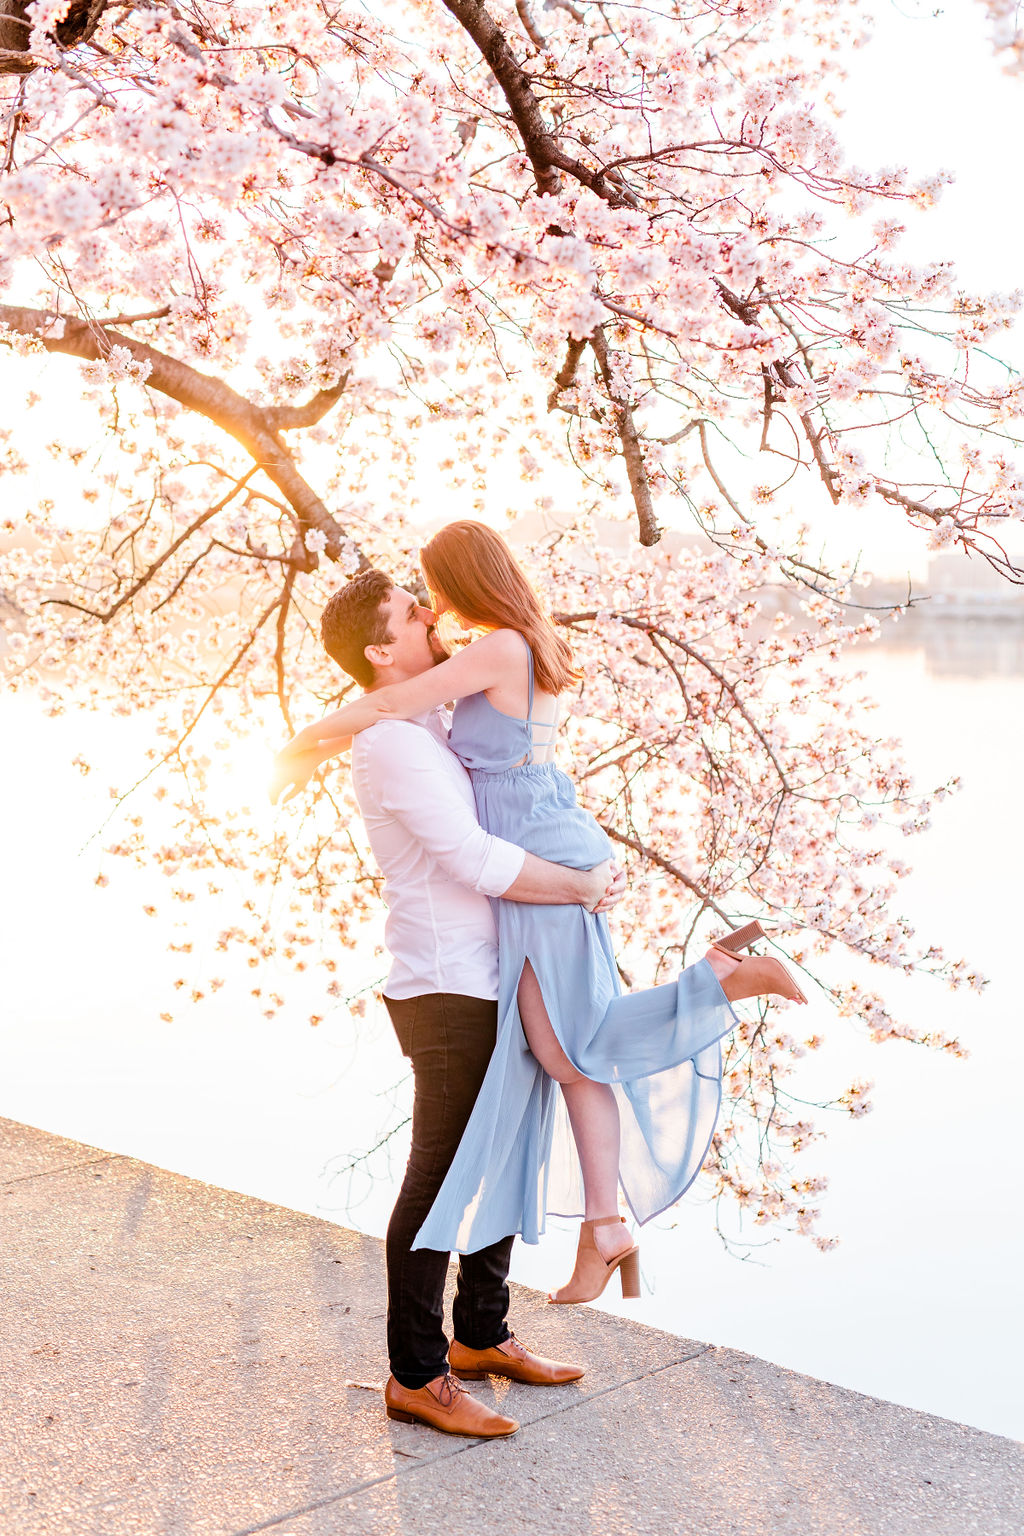 peak bloom cherry blossoms engagement, cherry blossoms engagement photos, DC peak bloom cherry blossoms, DC cherry blossoms photography, DC cherry blossoms photographer, ethereal cherry blossoms photos, DC cherry blossoms, Rachel E.H. Photography, man lifting woman, womans foot in air, blue maxi dress